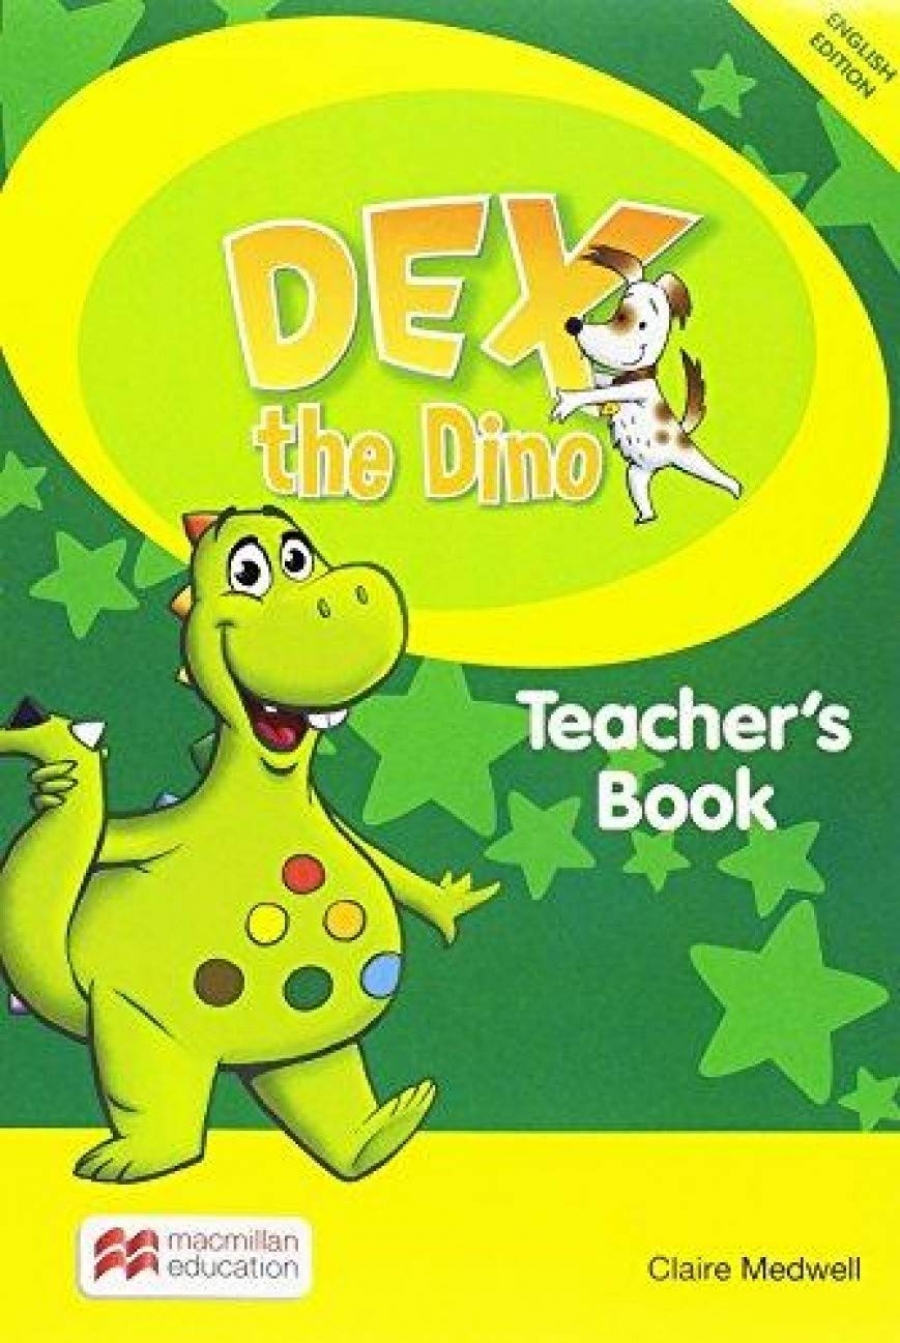 Medwell Claire, Mourao Sandie Dex the Dino. Teacher's Book Pack 